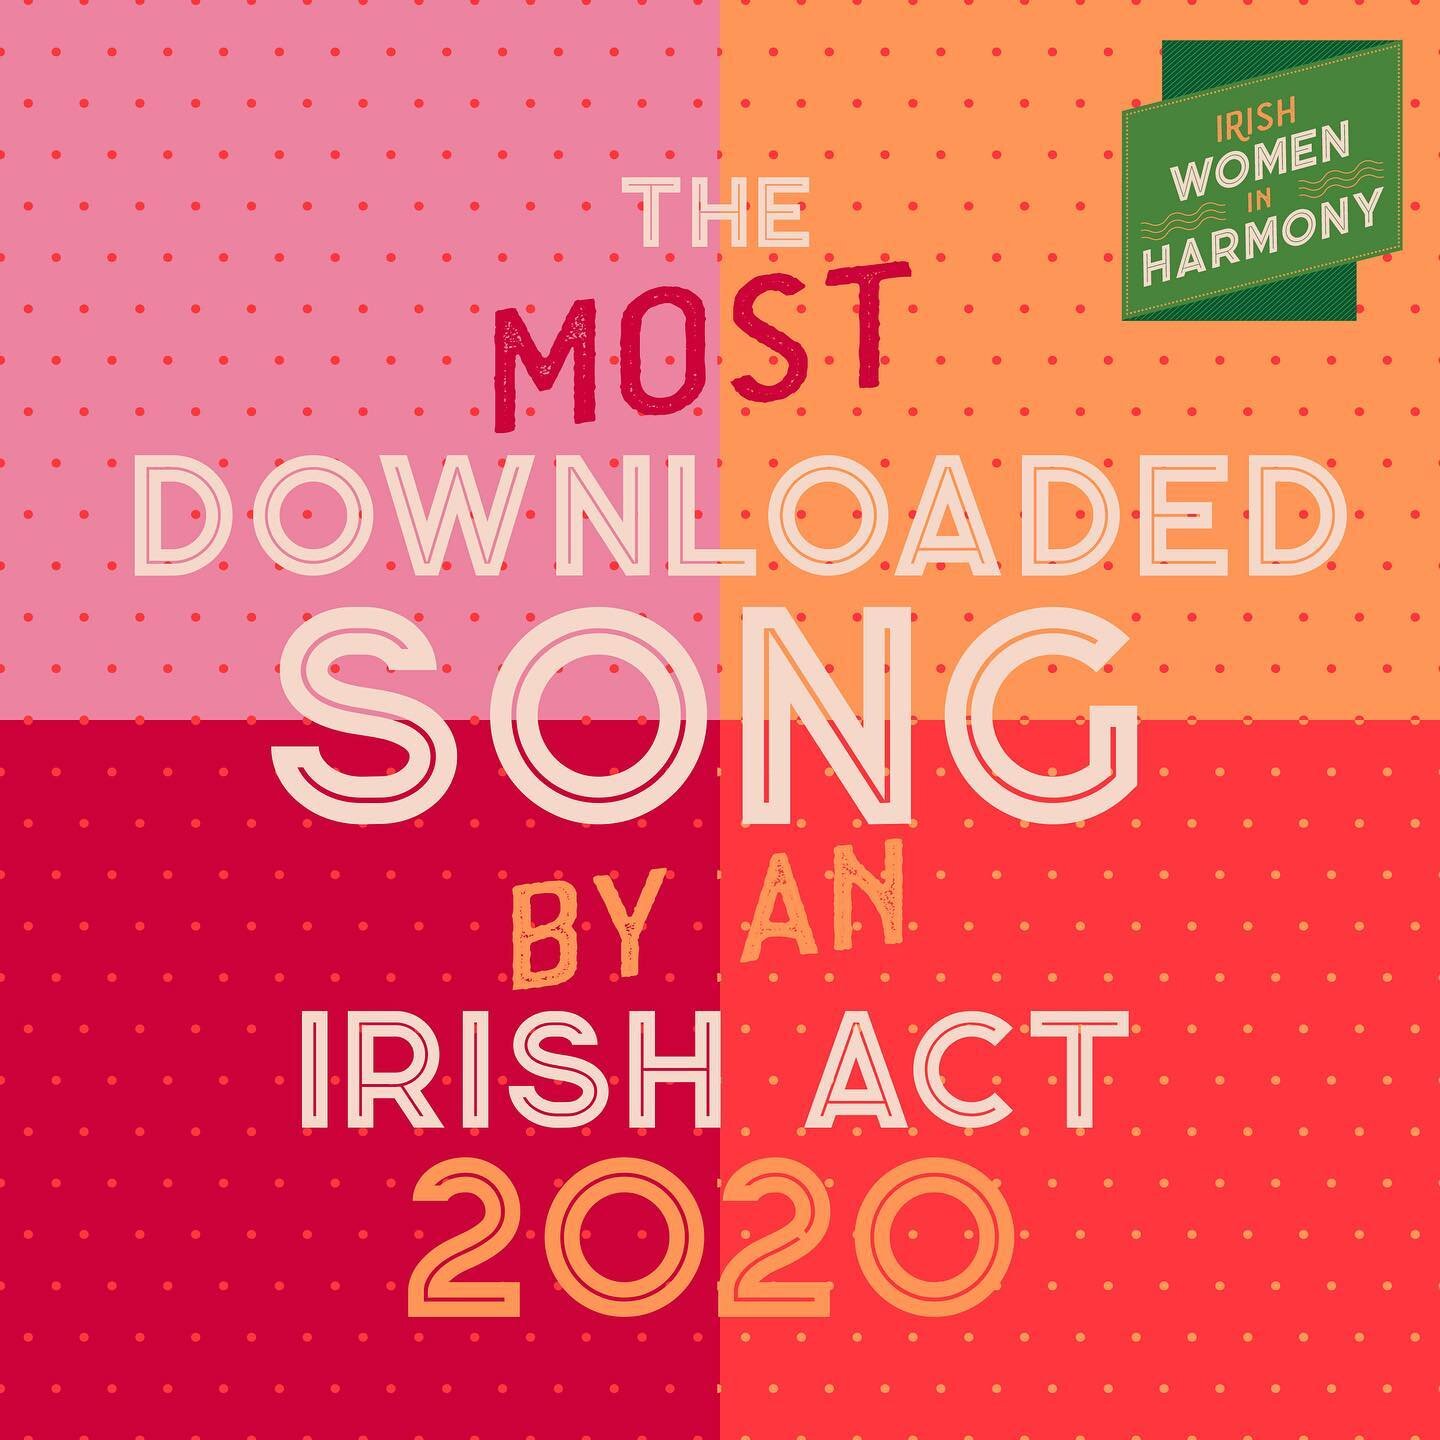 Thank you so much for making #dreams the most downloaded song of 2020 by an Irish act!! The power of women coming together. The power of the public embracing and supporting us. The proof that when women are given the platforms they can achieve big th